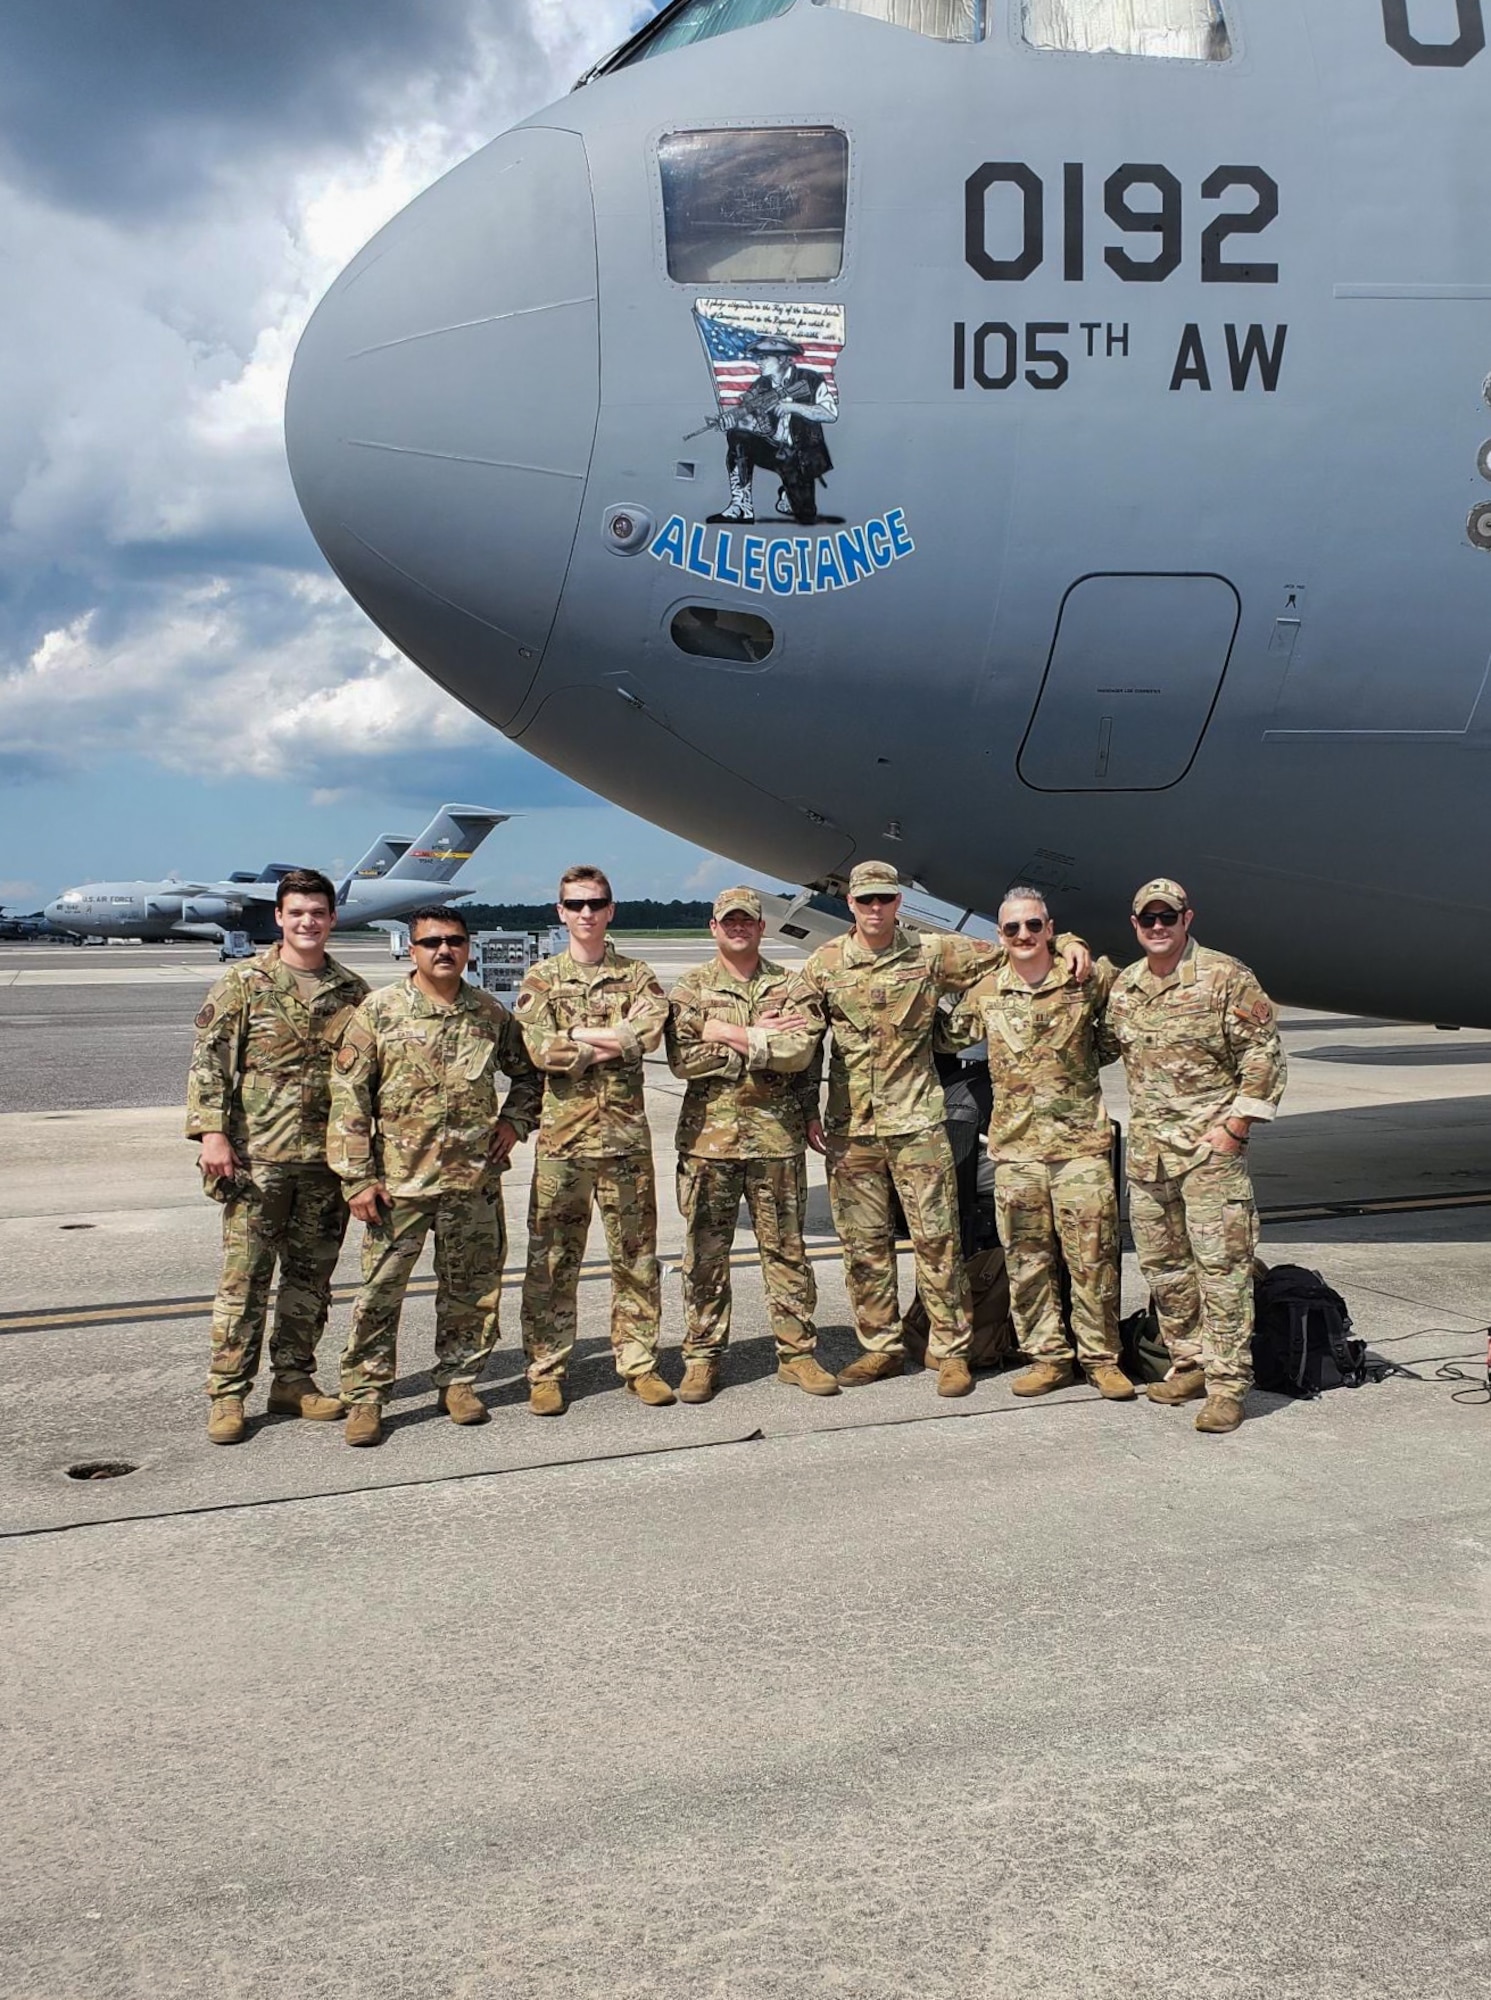 U.S. Airmen, crew members of Reach 824, 105th Airlift Wing, New York National Guard, pose for a photo in front of a C-17 Globemaster III at Joint Base Charleston in North Charleston, South Carolina, on Aug. 19, 2021. For their bravery and innovative thinking during the evacuation of Americans and Afghans from Kabul, Afghanistan in August 2021, the crew members were awarded either the Distinguished Flying Cross with Valor, the nation's highest honor for heroism during aerial operations, the Air Medal with Valor, or the Meritorious Service Medal. (Courtesy photo)